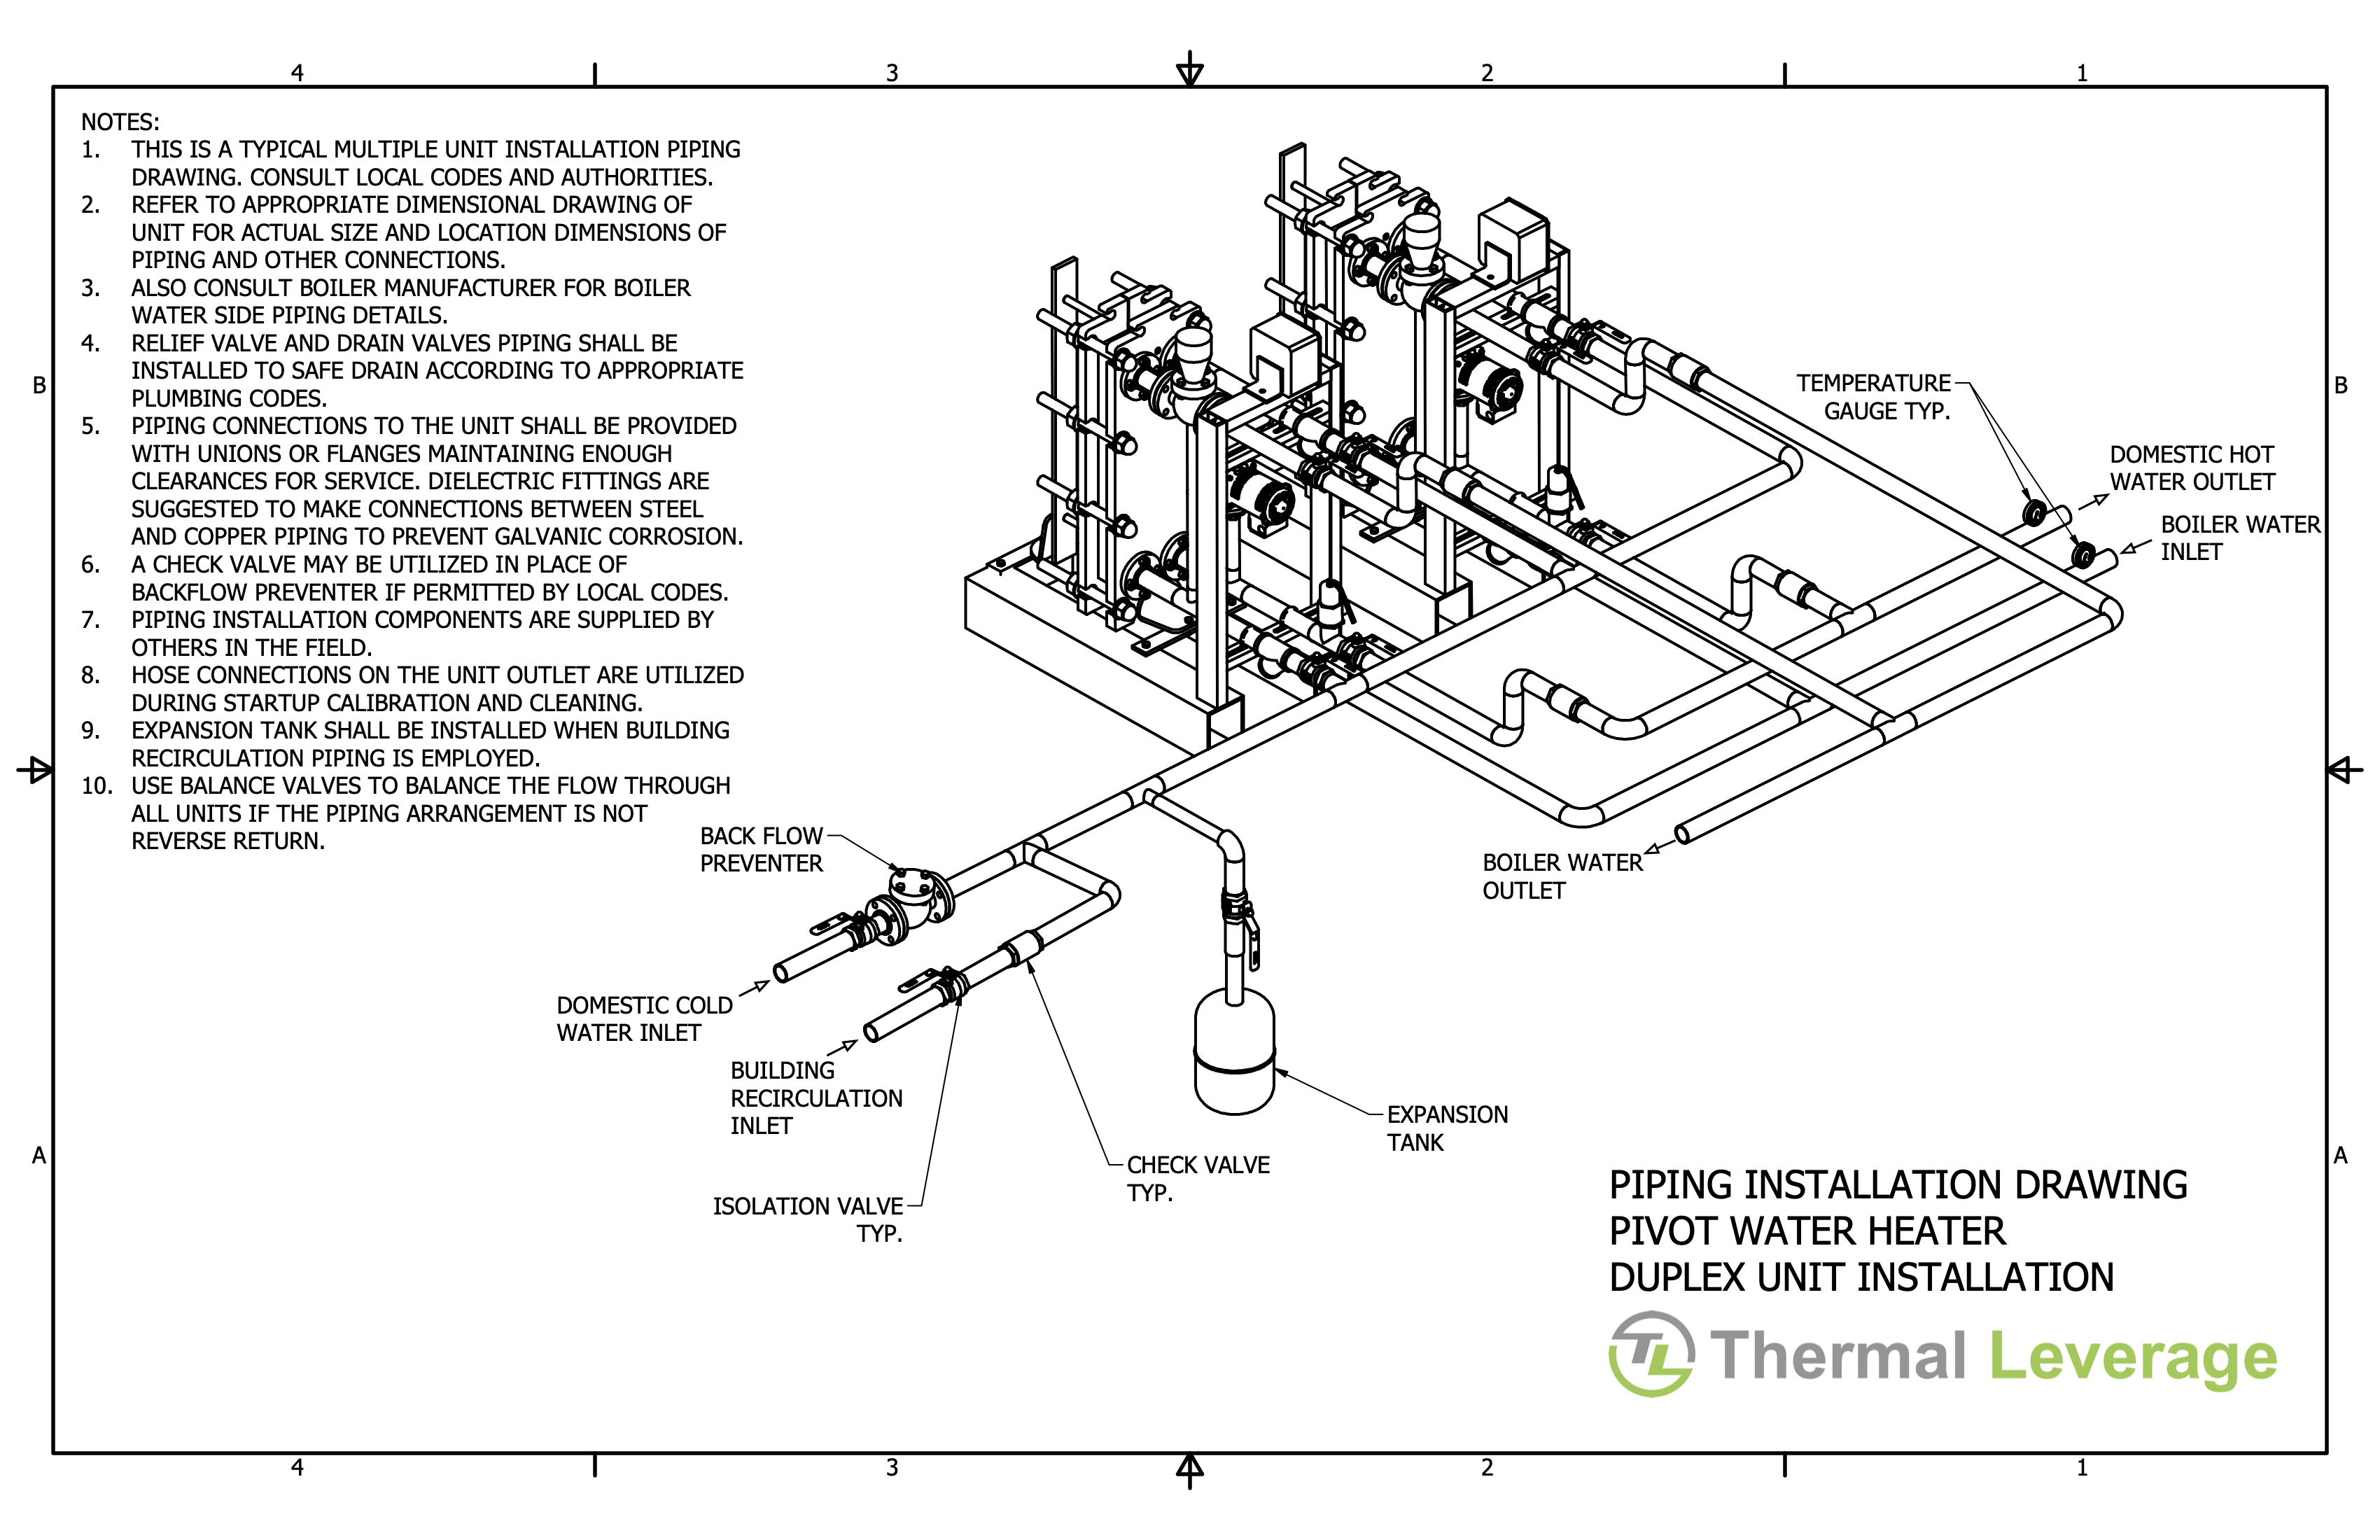 PIPING-INSTALL-DRAWING-PIVOT-WATER-HEATER-DUPLEX-UNIT-INSTALL.png